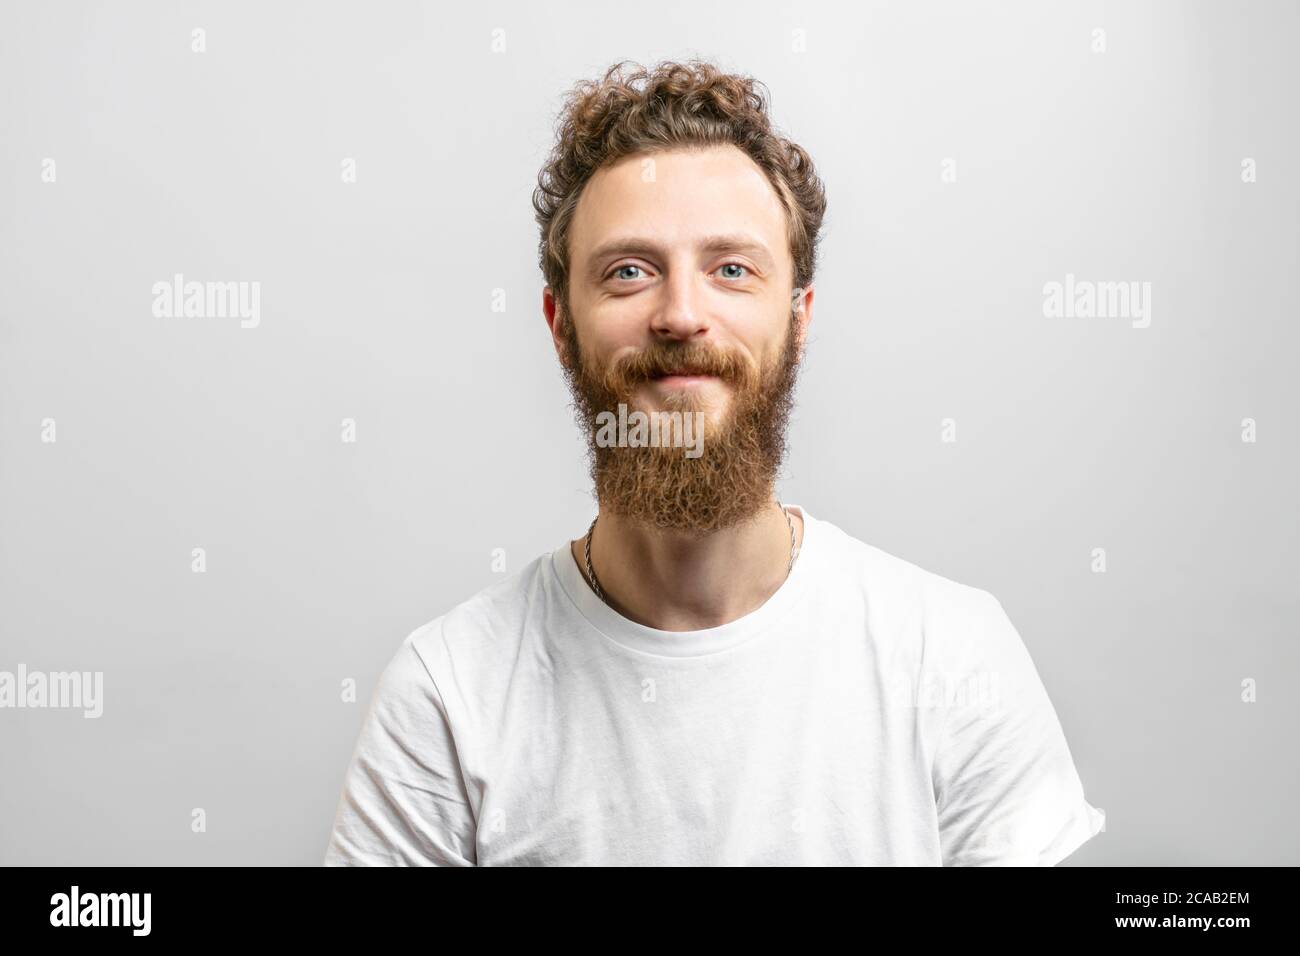 Portrait of young handsome softie, good-looking kind hipster man with beard smiling and looking at camera over white background. Stock Photo